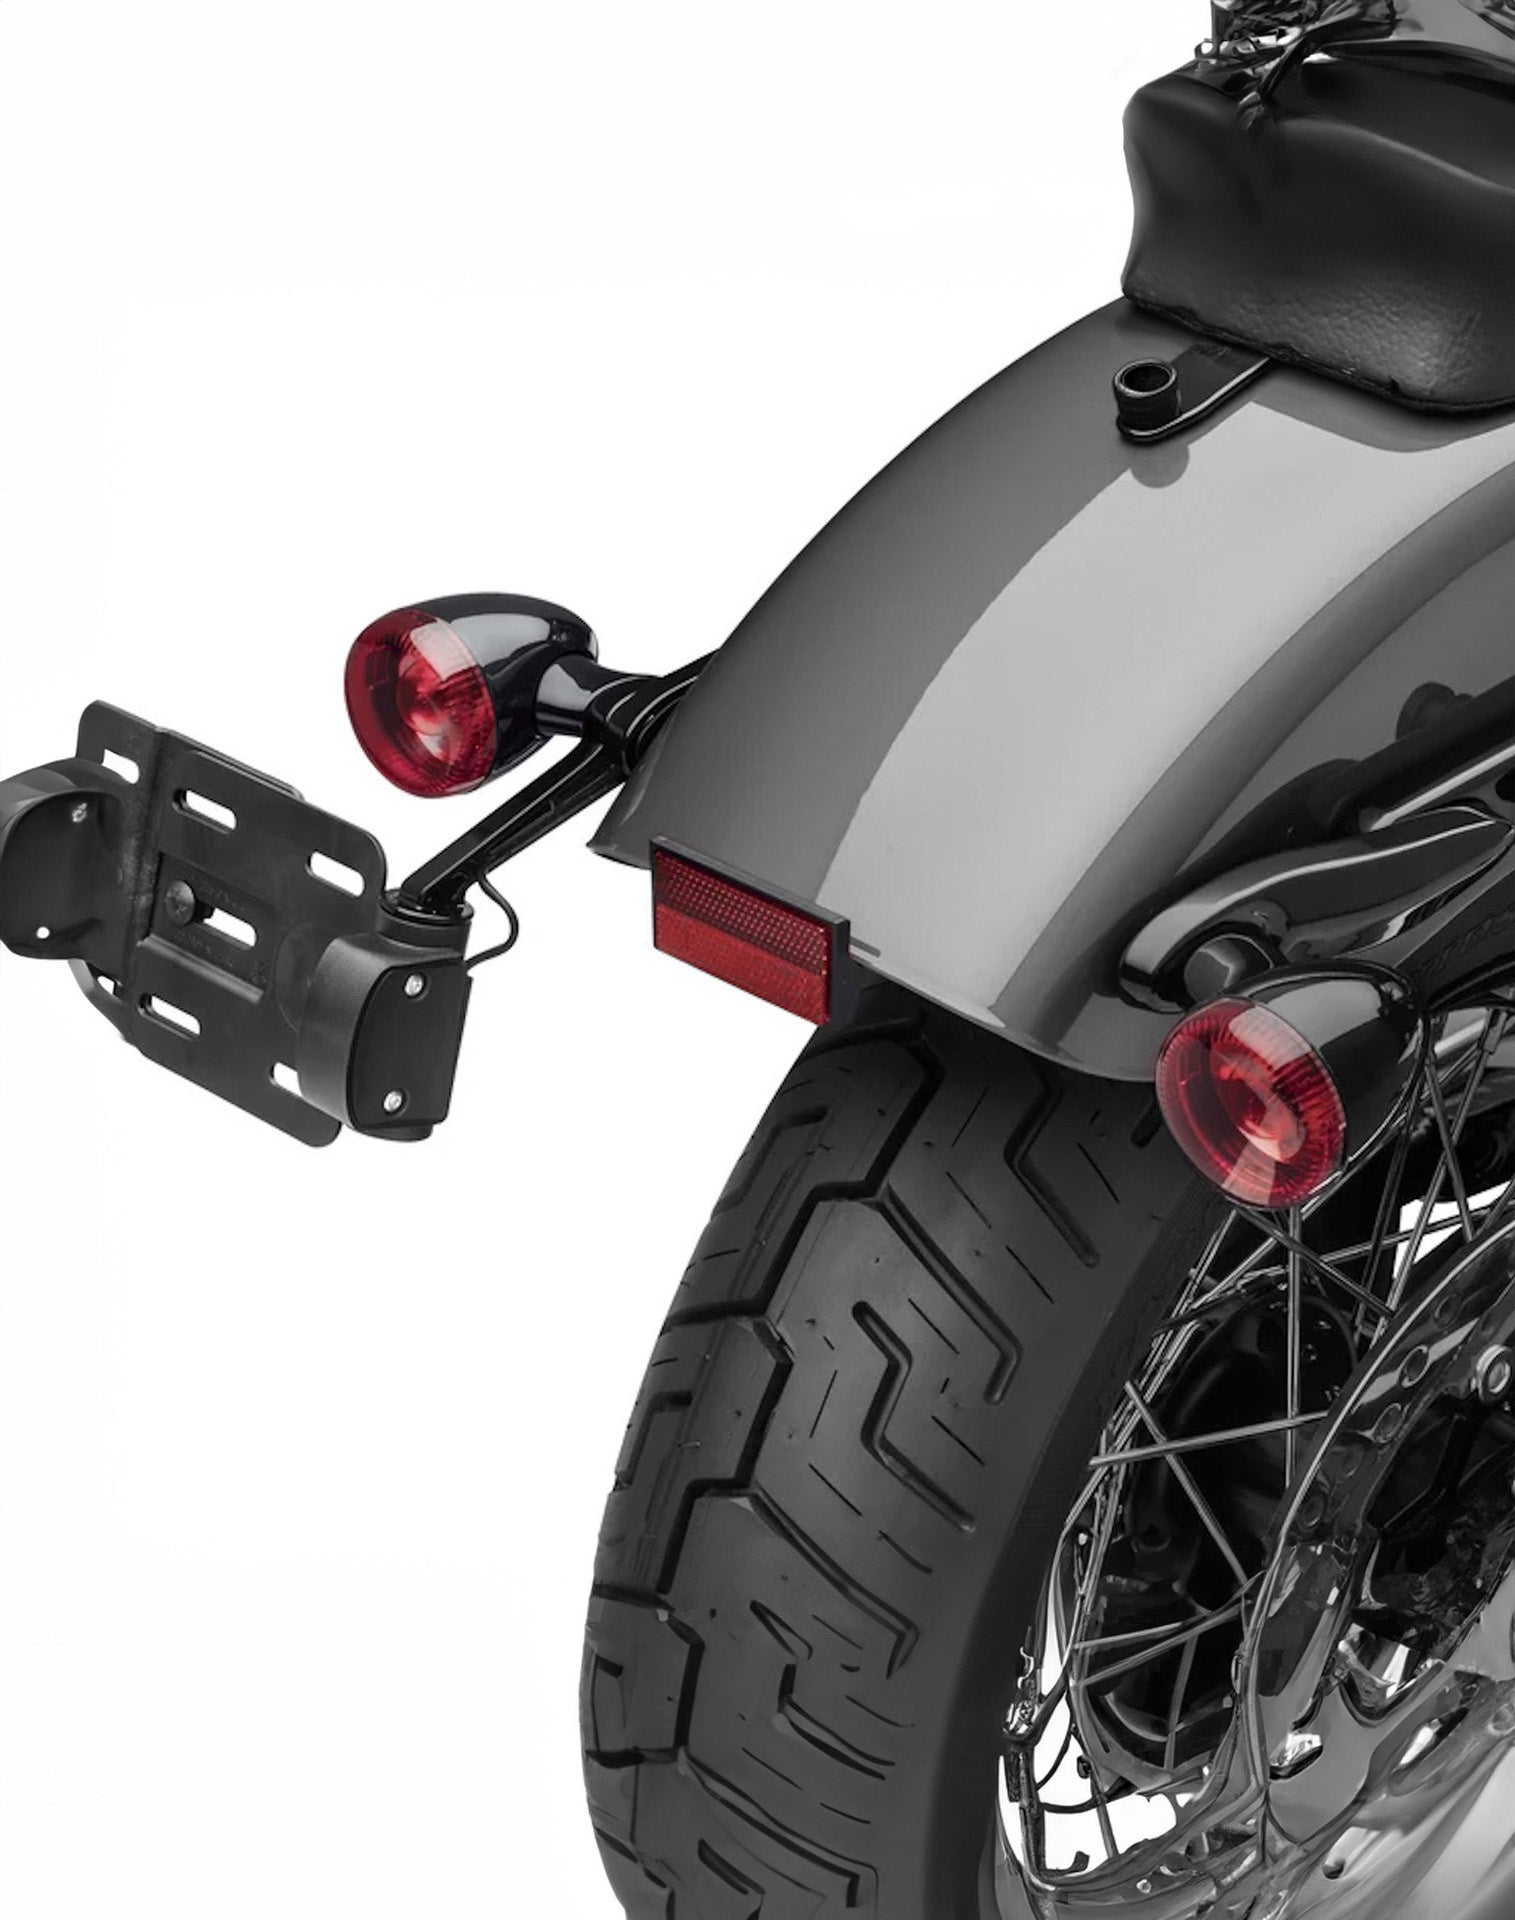 Viking Turn Signal & License Plate Relocation/ Extension Kit For Harley Davidson Softail 2018+ Models